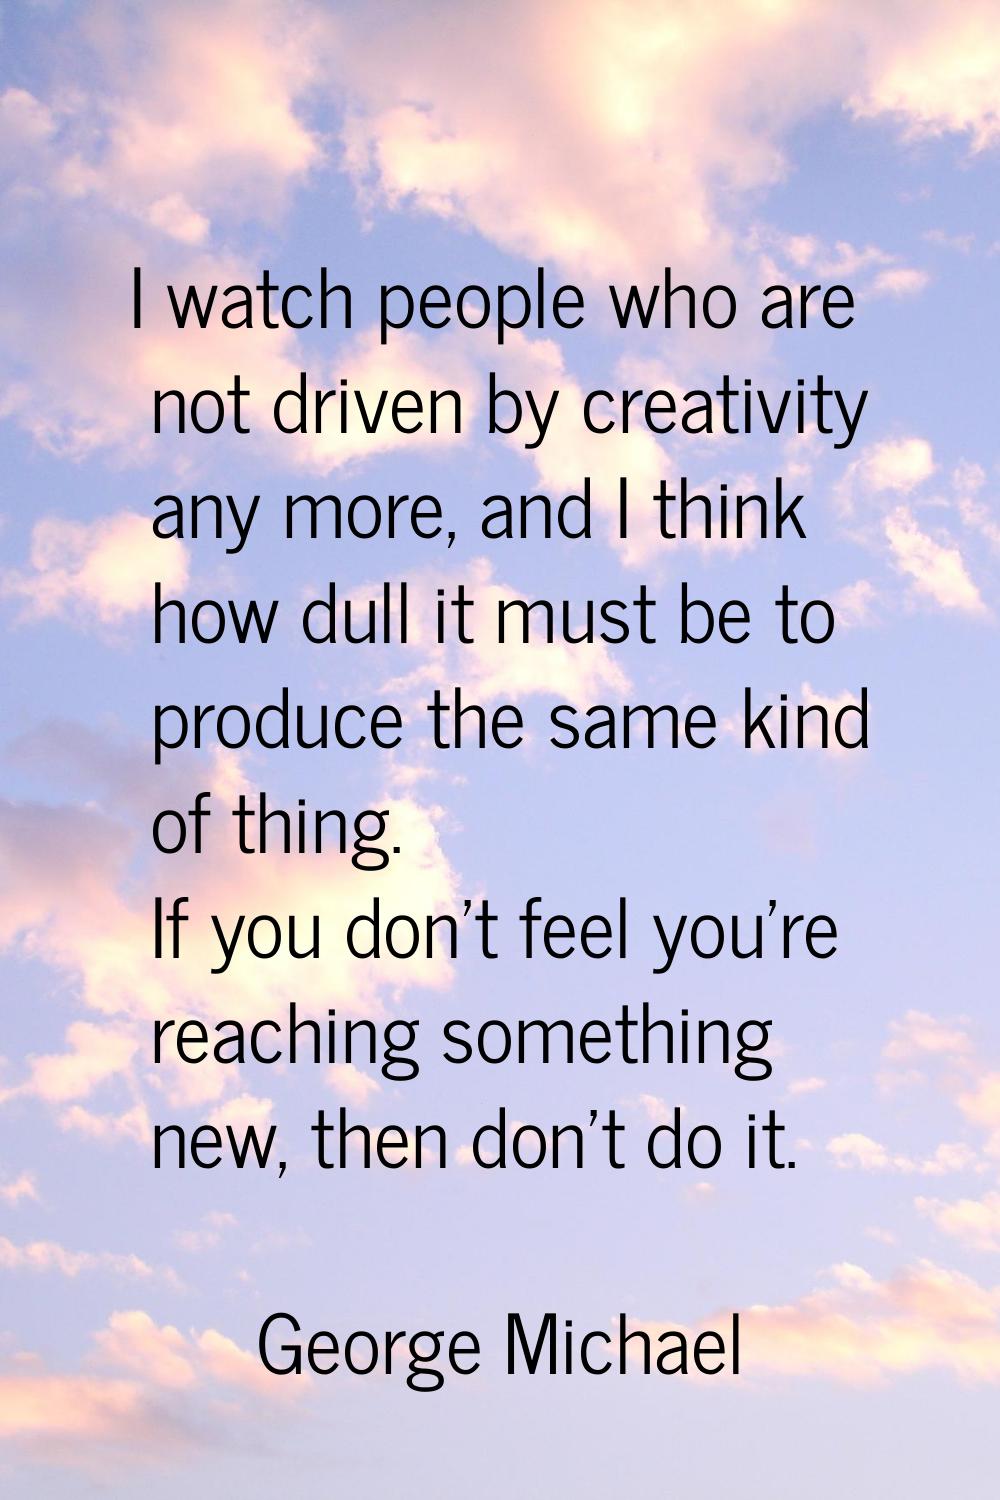 I watch people who are not driven by creativity any more, and I think how dull it must be to produc